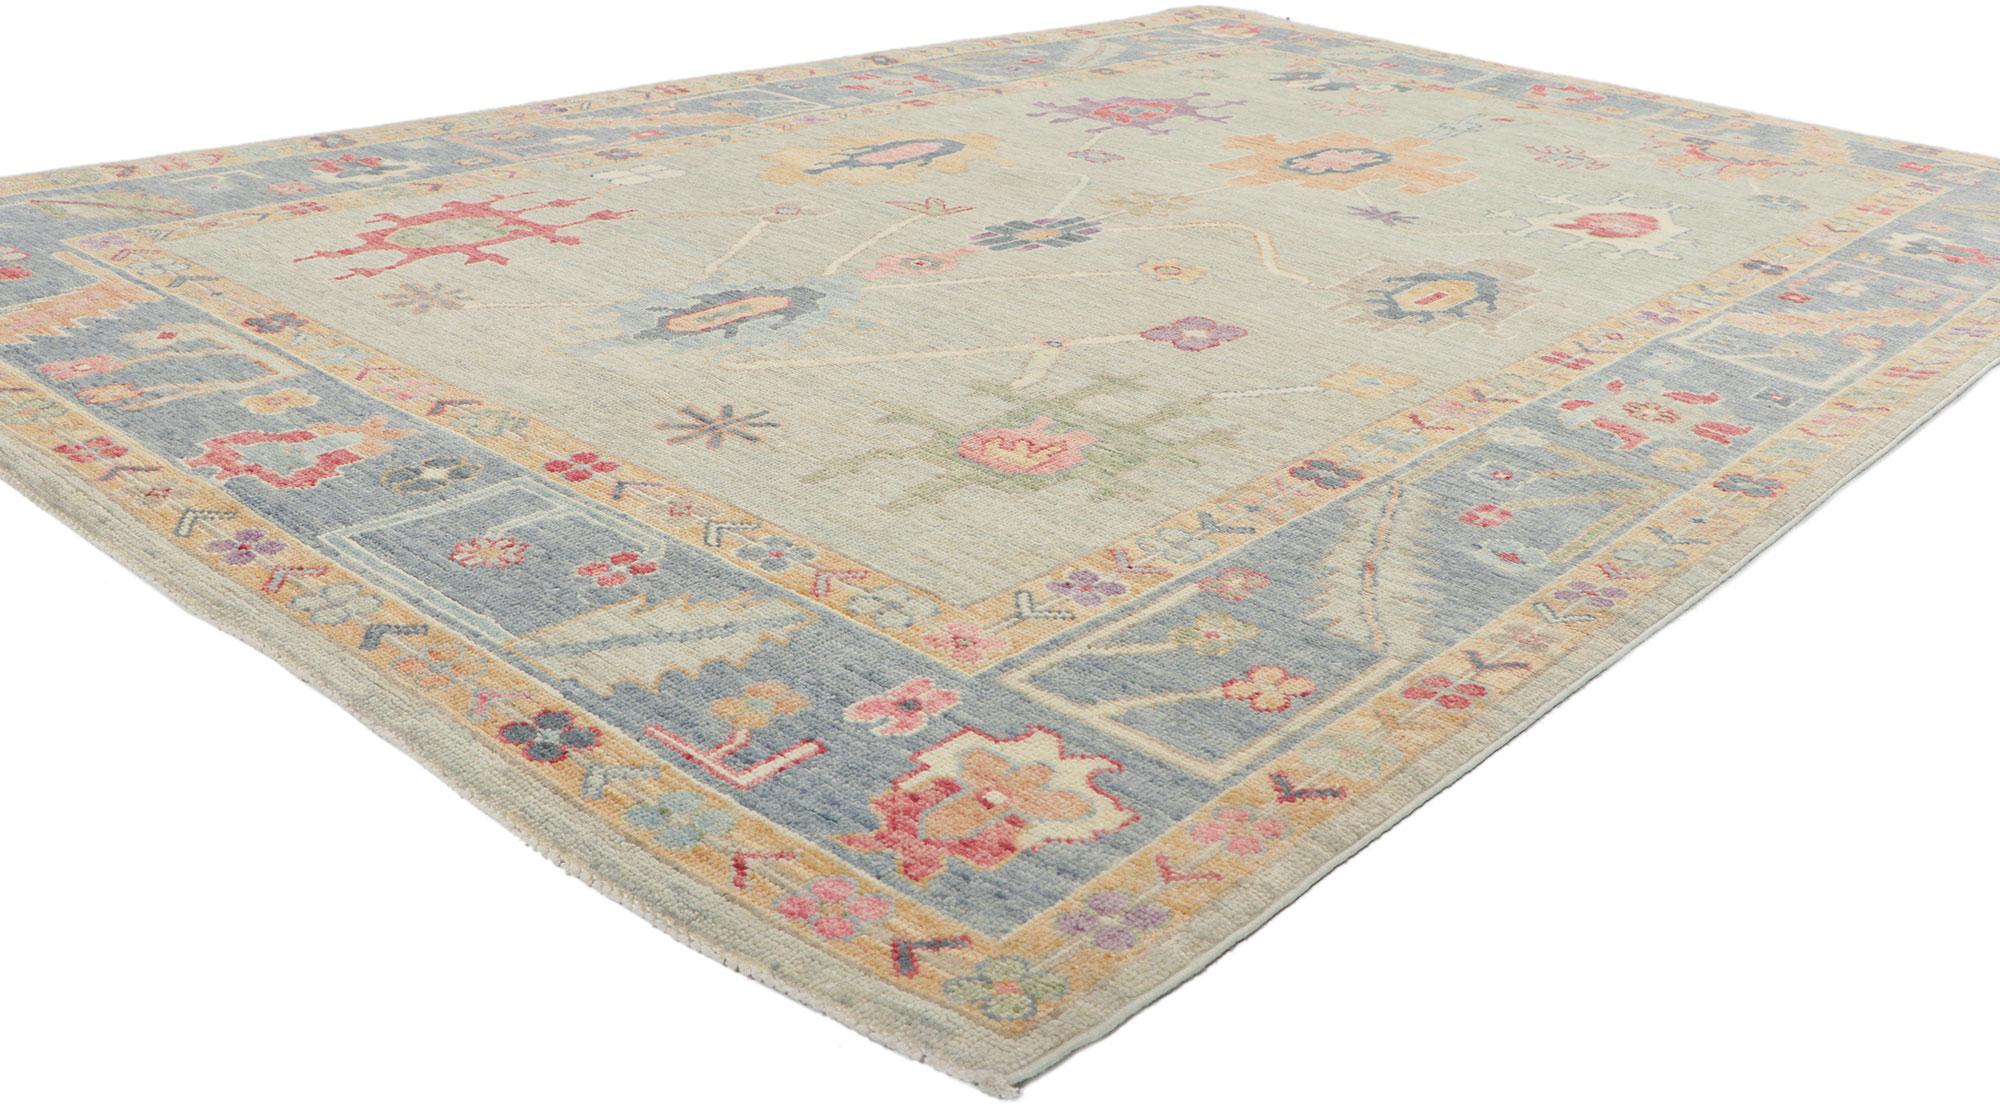 80919 New Contemporary Oushak Rug with Soft Colors, 06'01 x 09'02.